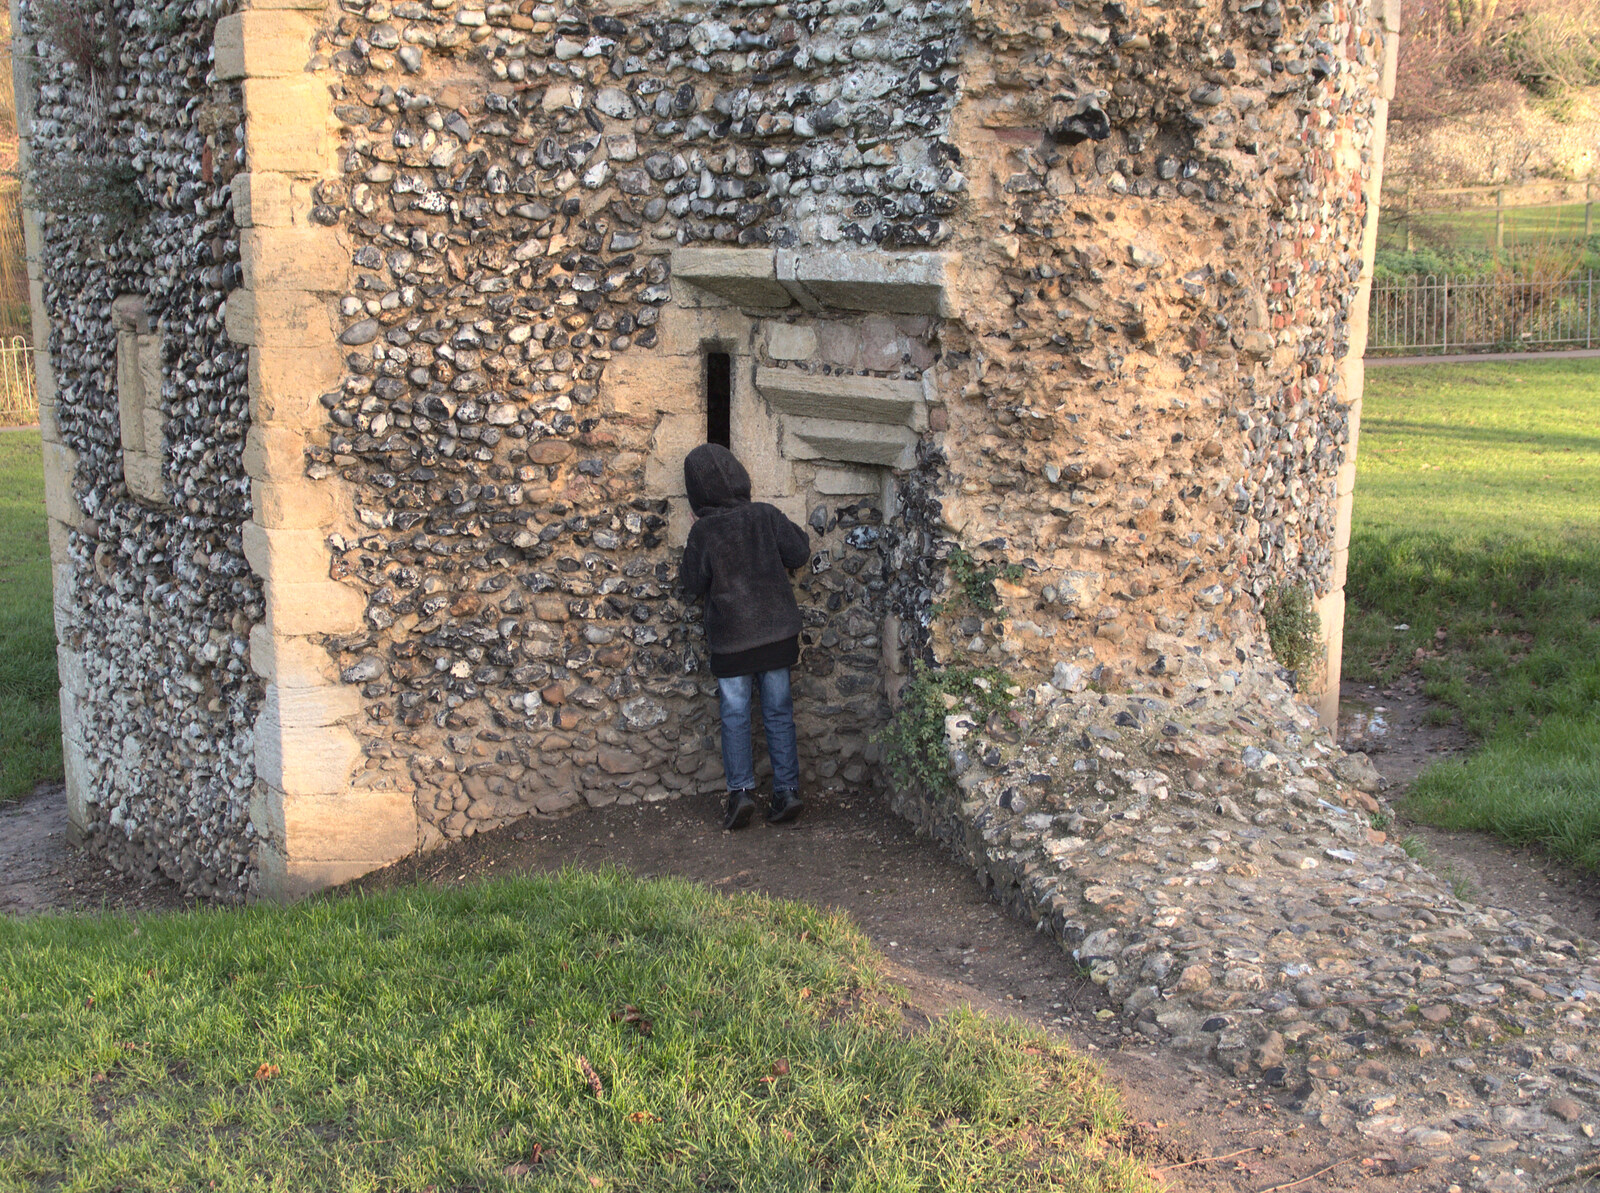 Fred peers into an arrow slit from A Trip to Abbey Gardens, Bury St. Edmunds, Suffolk - 20th December 2014